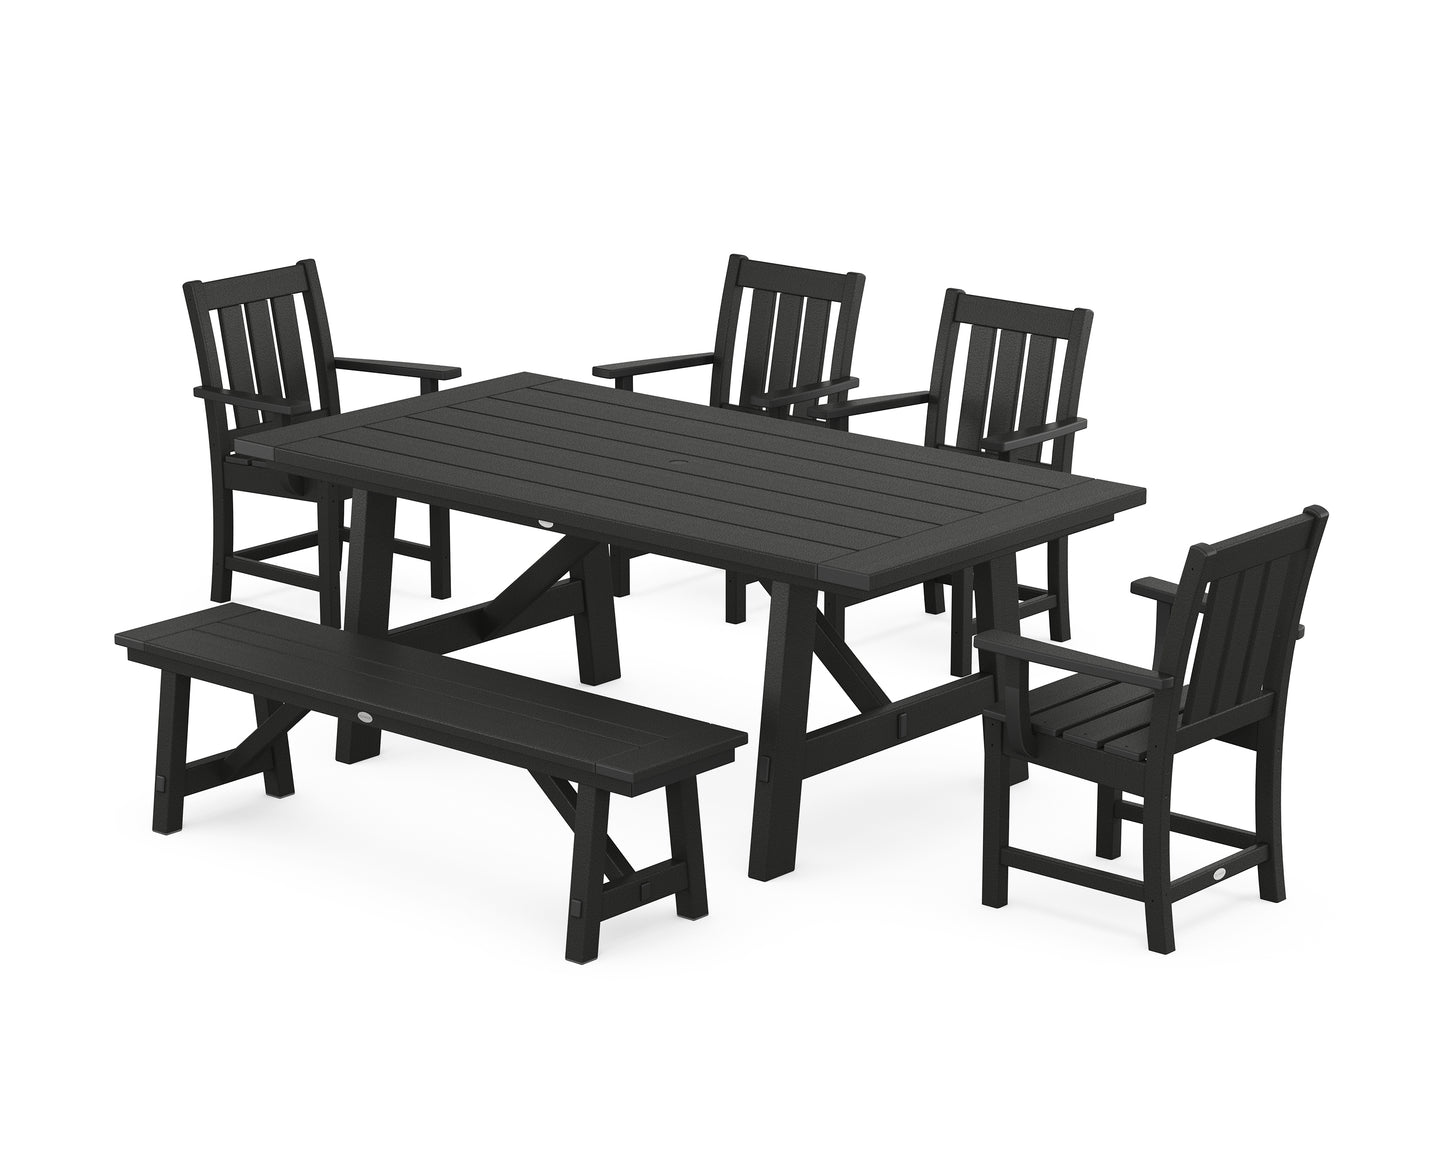 Oxford 6-Piece Rustic Farmhouse Dining Set with Bench